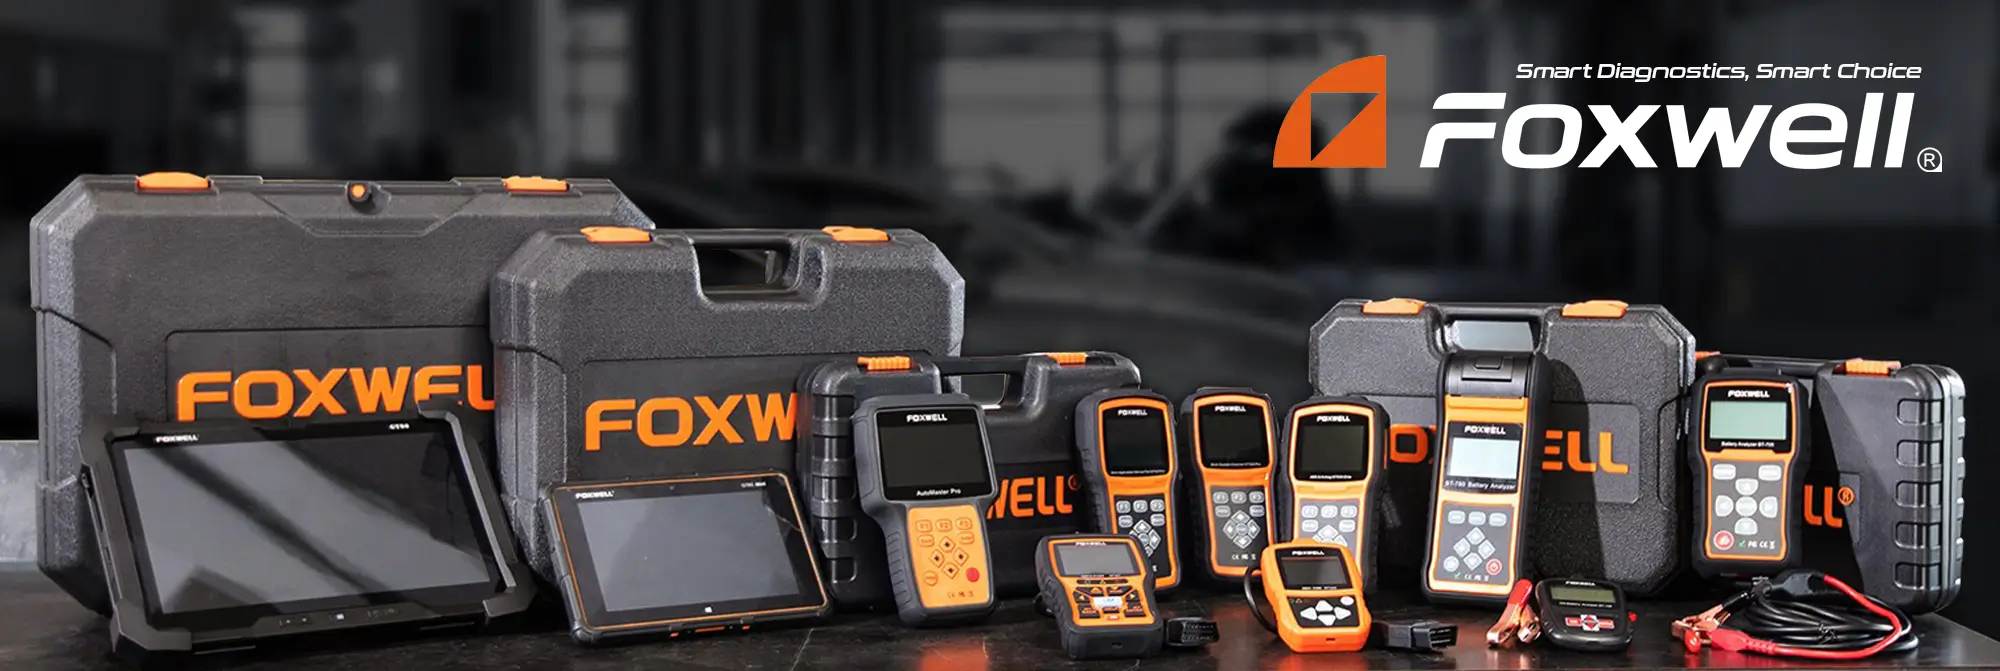 Foxwell Vehicle Diagnostic Scan Tools